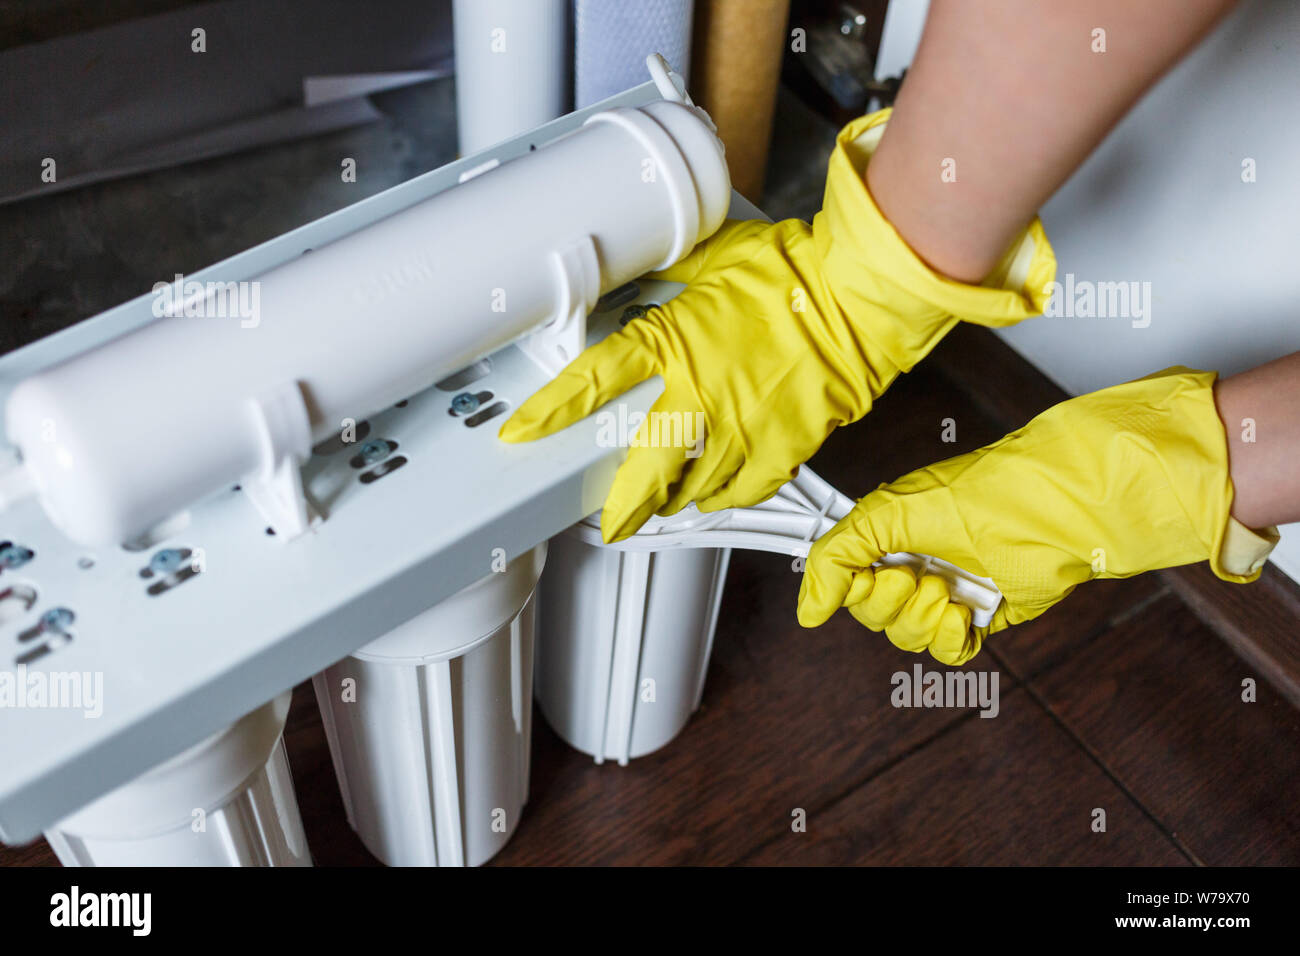 Plumber in yellow household gloves changes water filters. Repairman installing water filter cartridges in kitchen. Drinkable water filtration system i Stock Photo